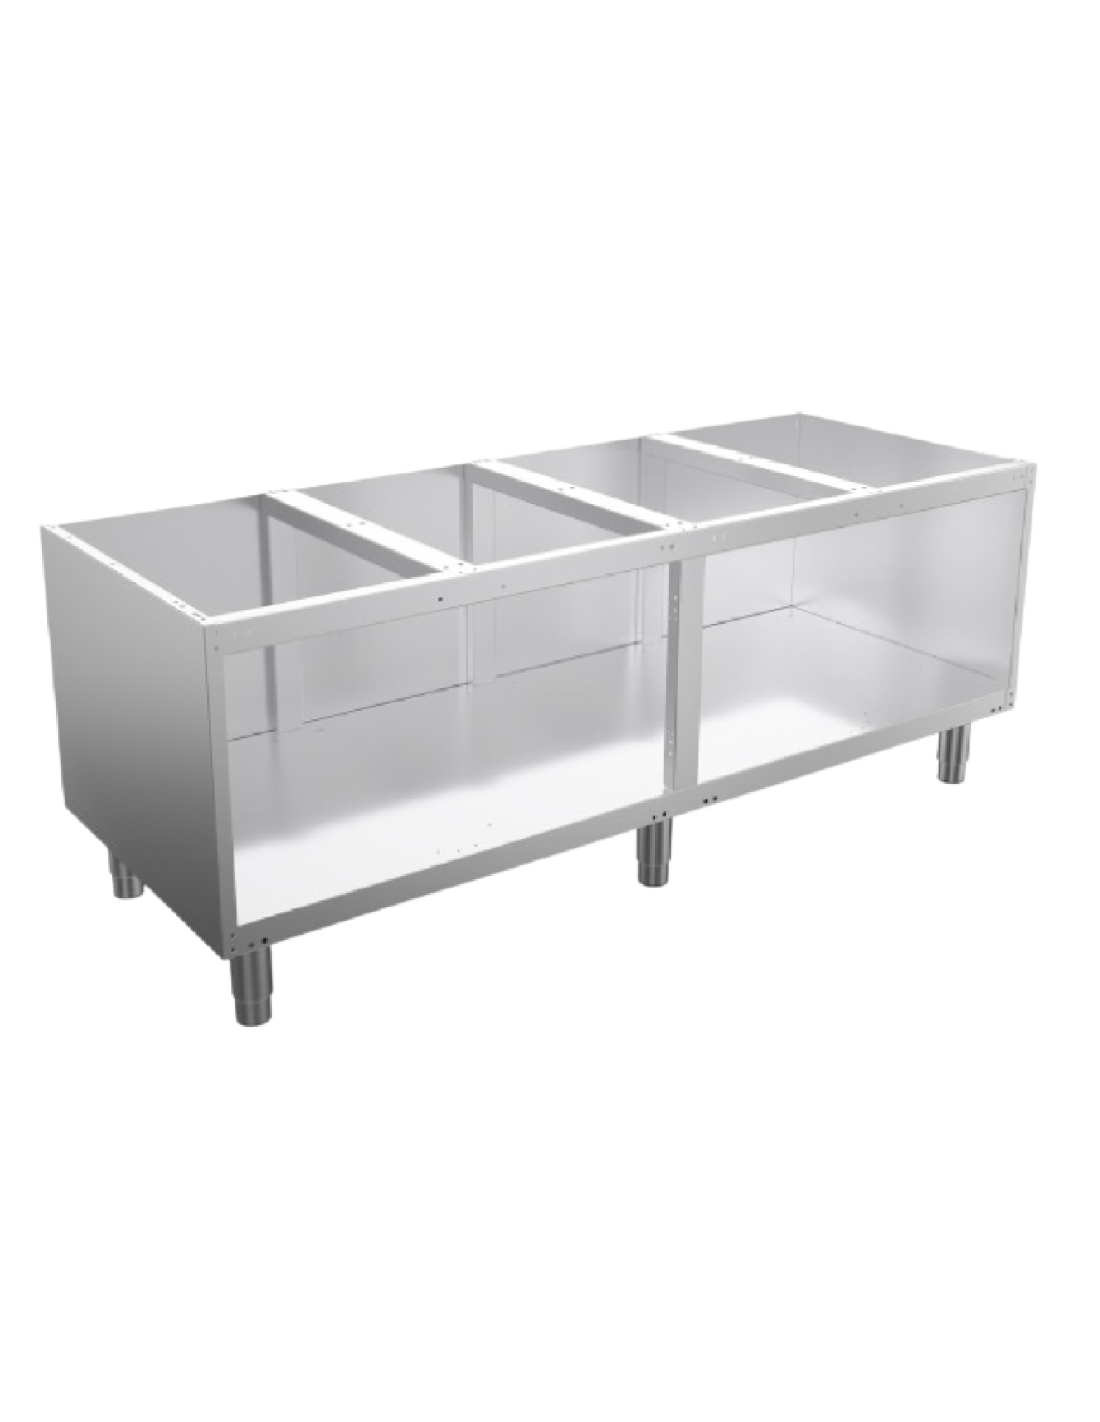 Neutral base with open compartment cm 160 x 64.5 x 62 h